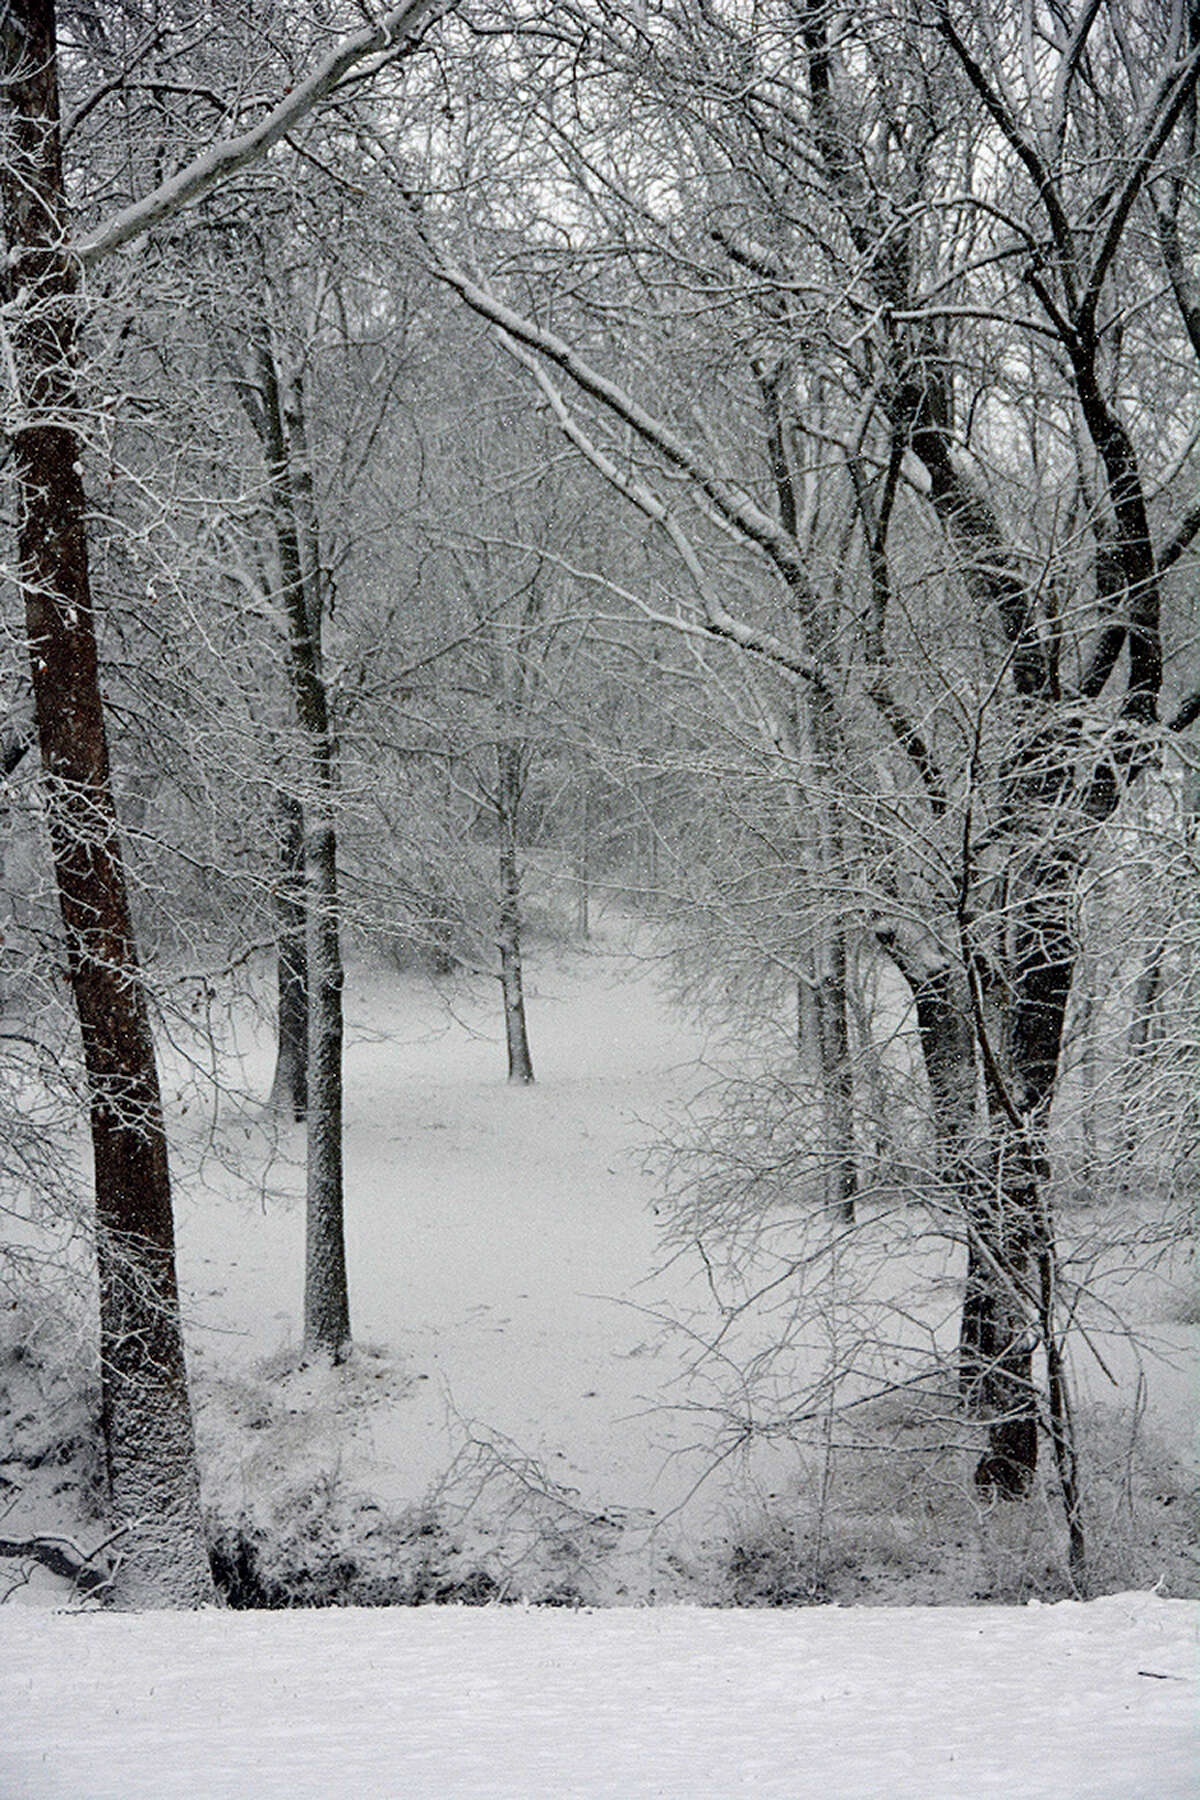 Snow blankets paths through a wooded area.